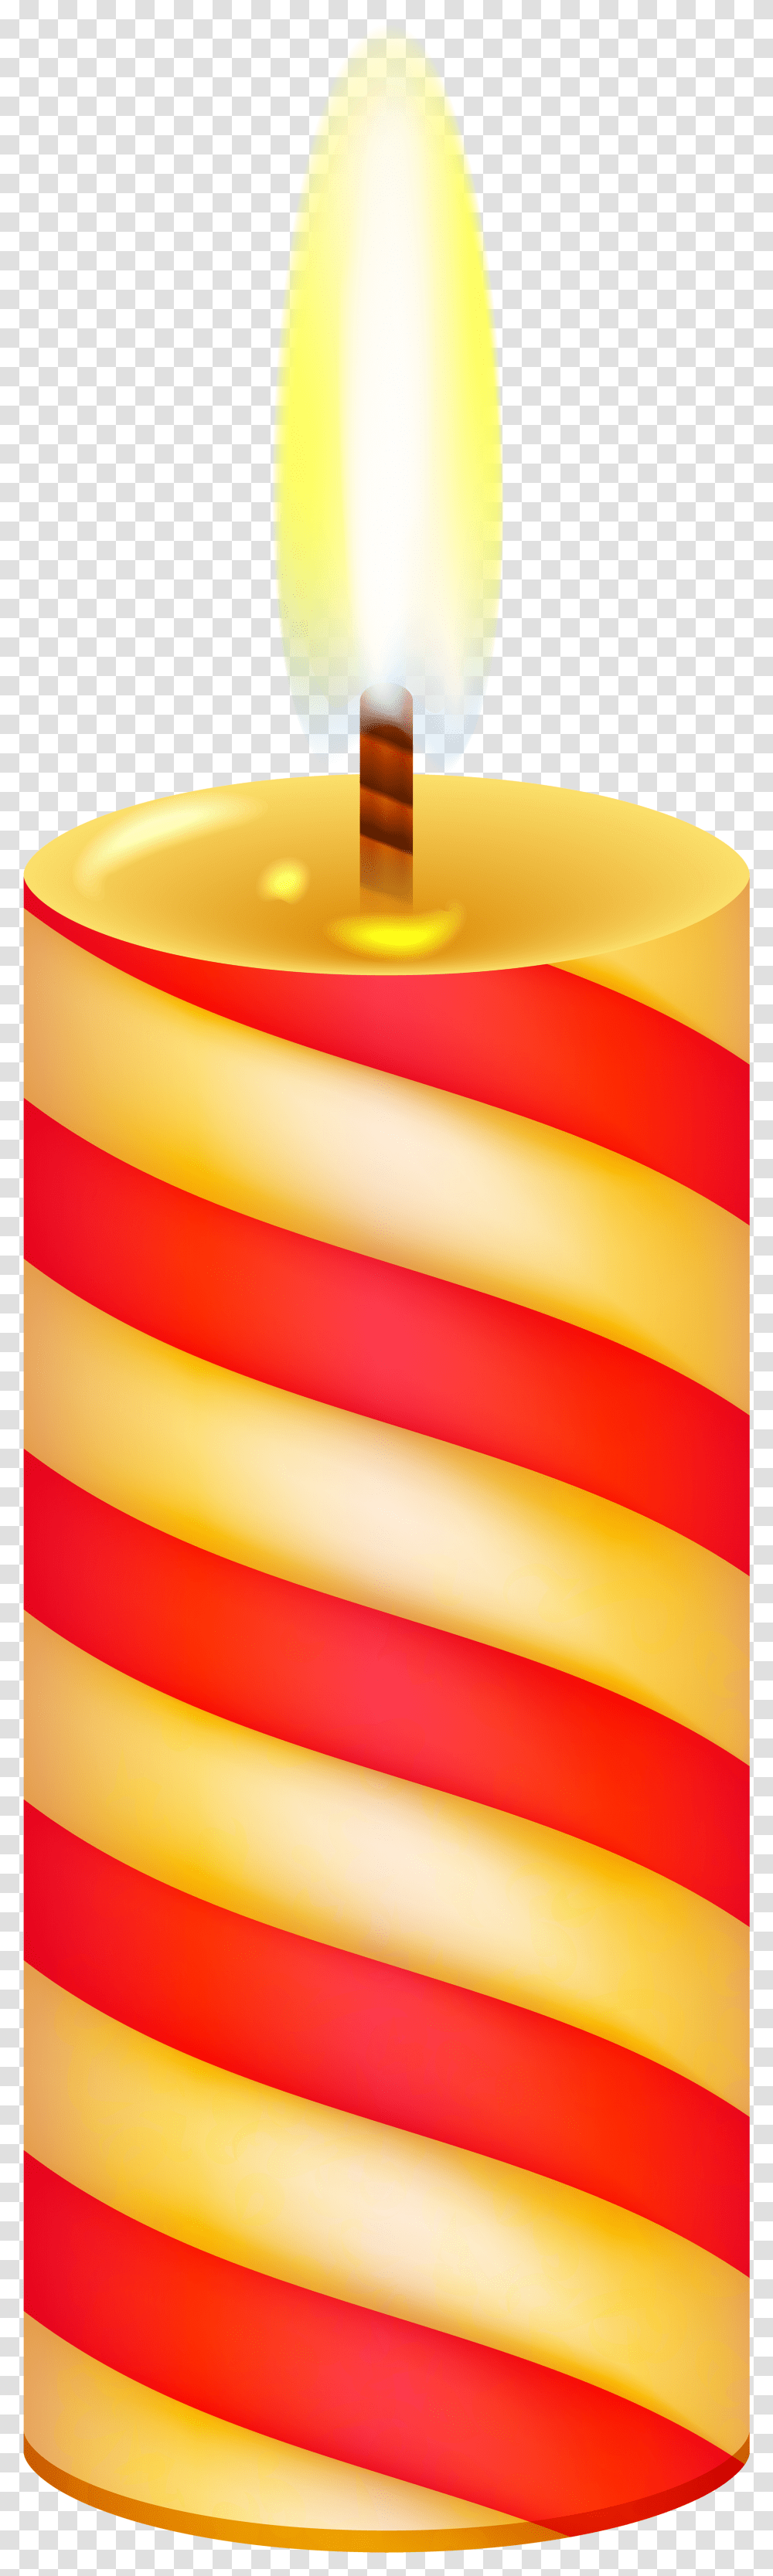 Red Clip Art Best Web Birthday Candles Red And Yellow Transparent Png